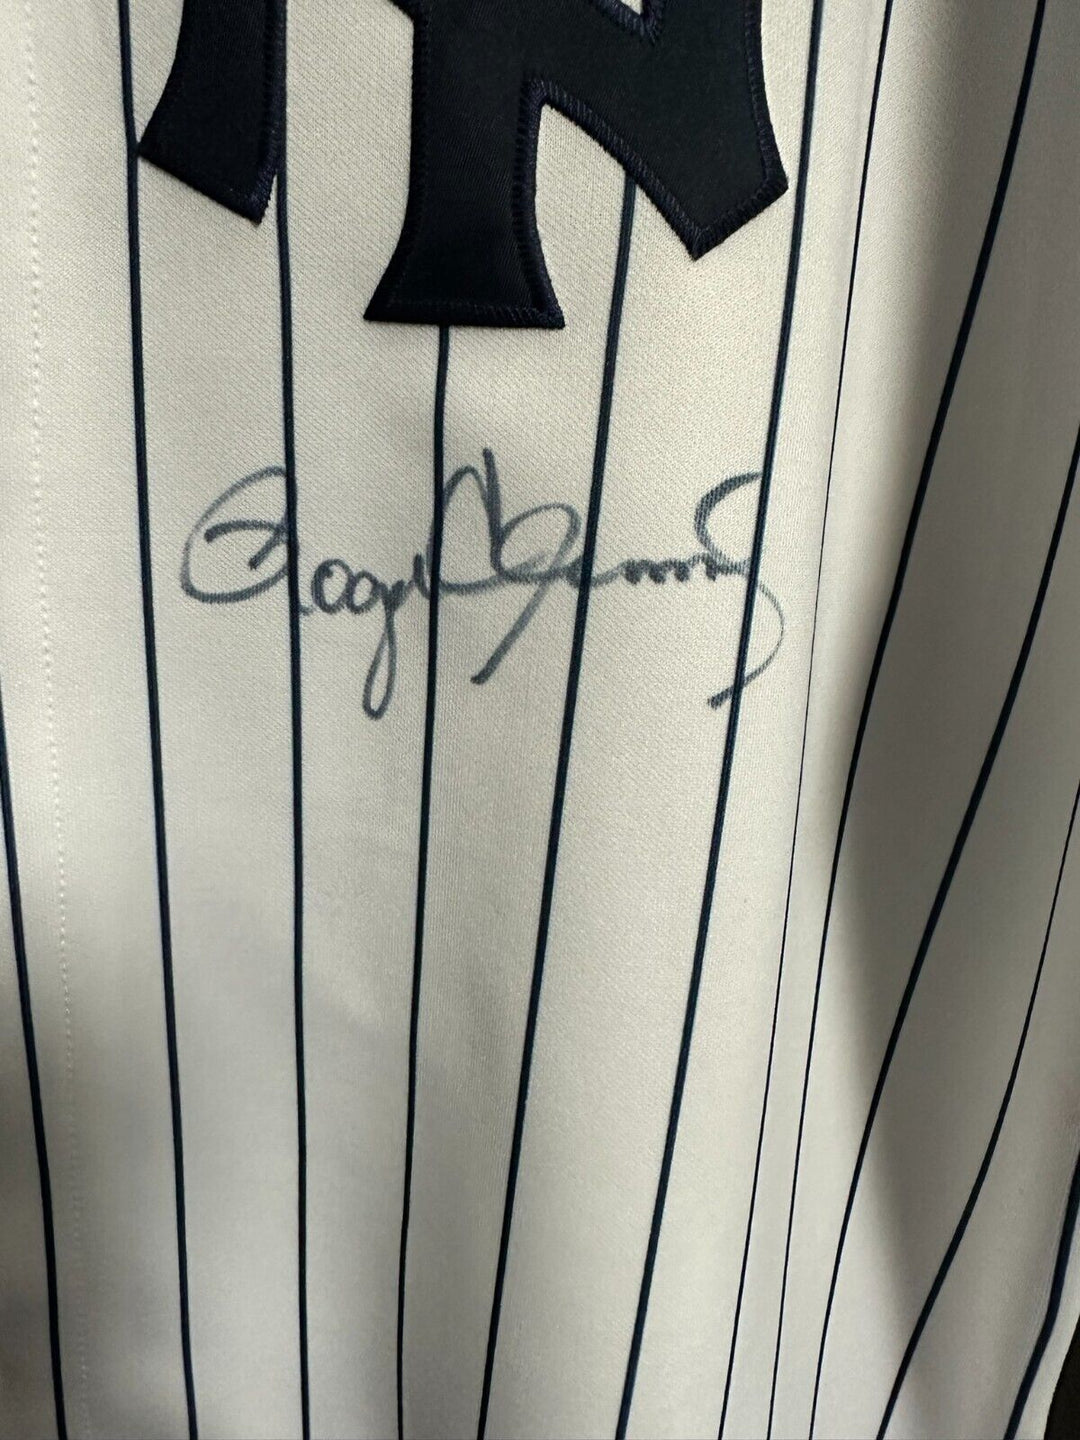 Roger Clemens Autographed Majestic New York Yankees Jersey Clemens Hologram